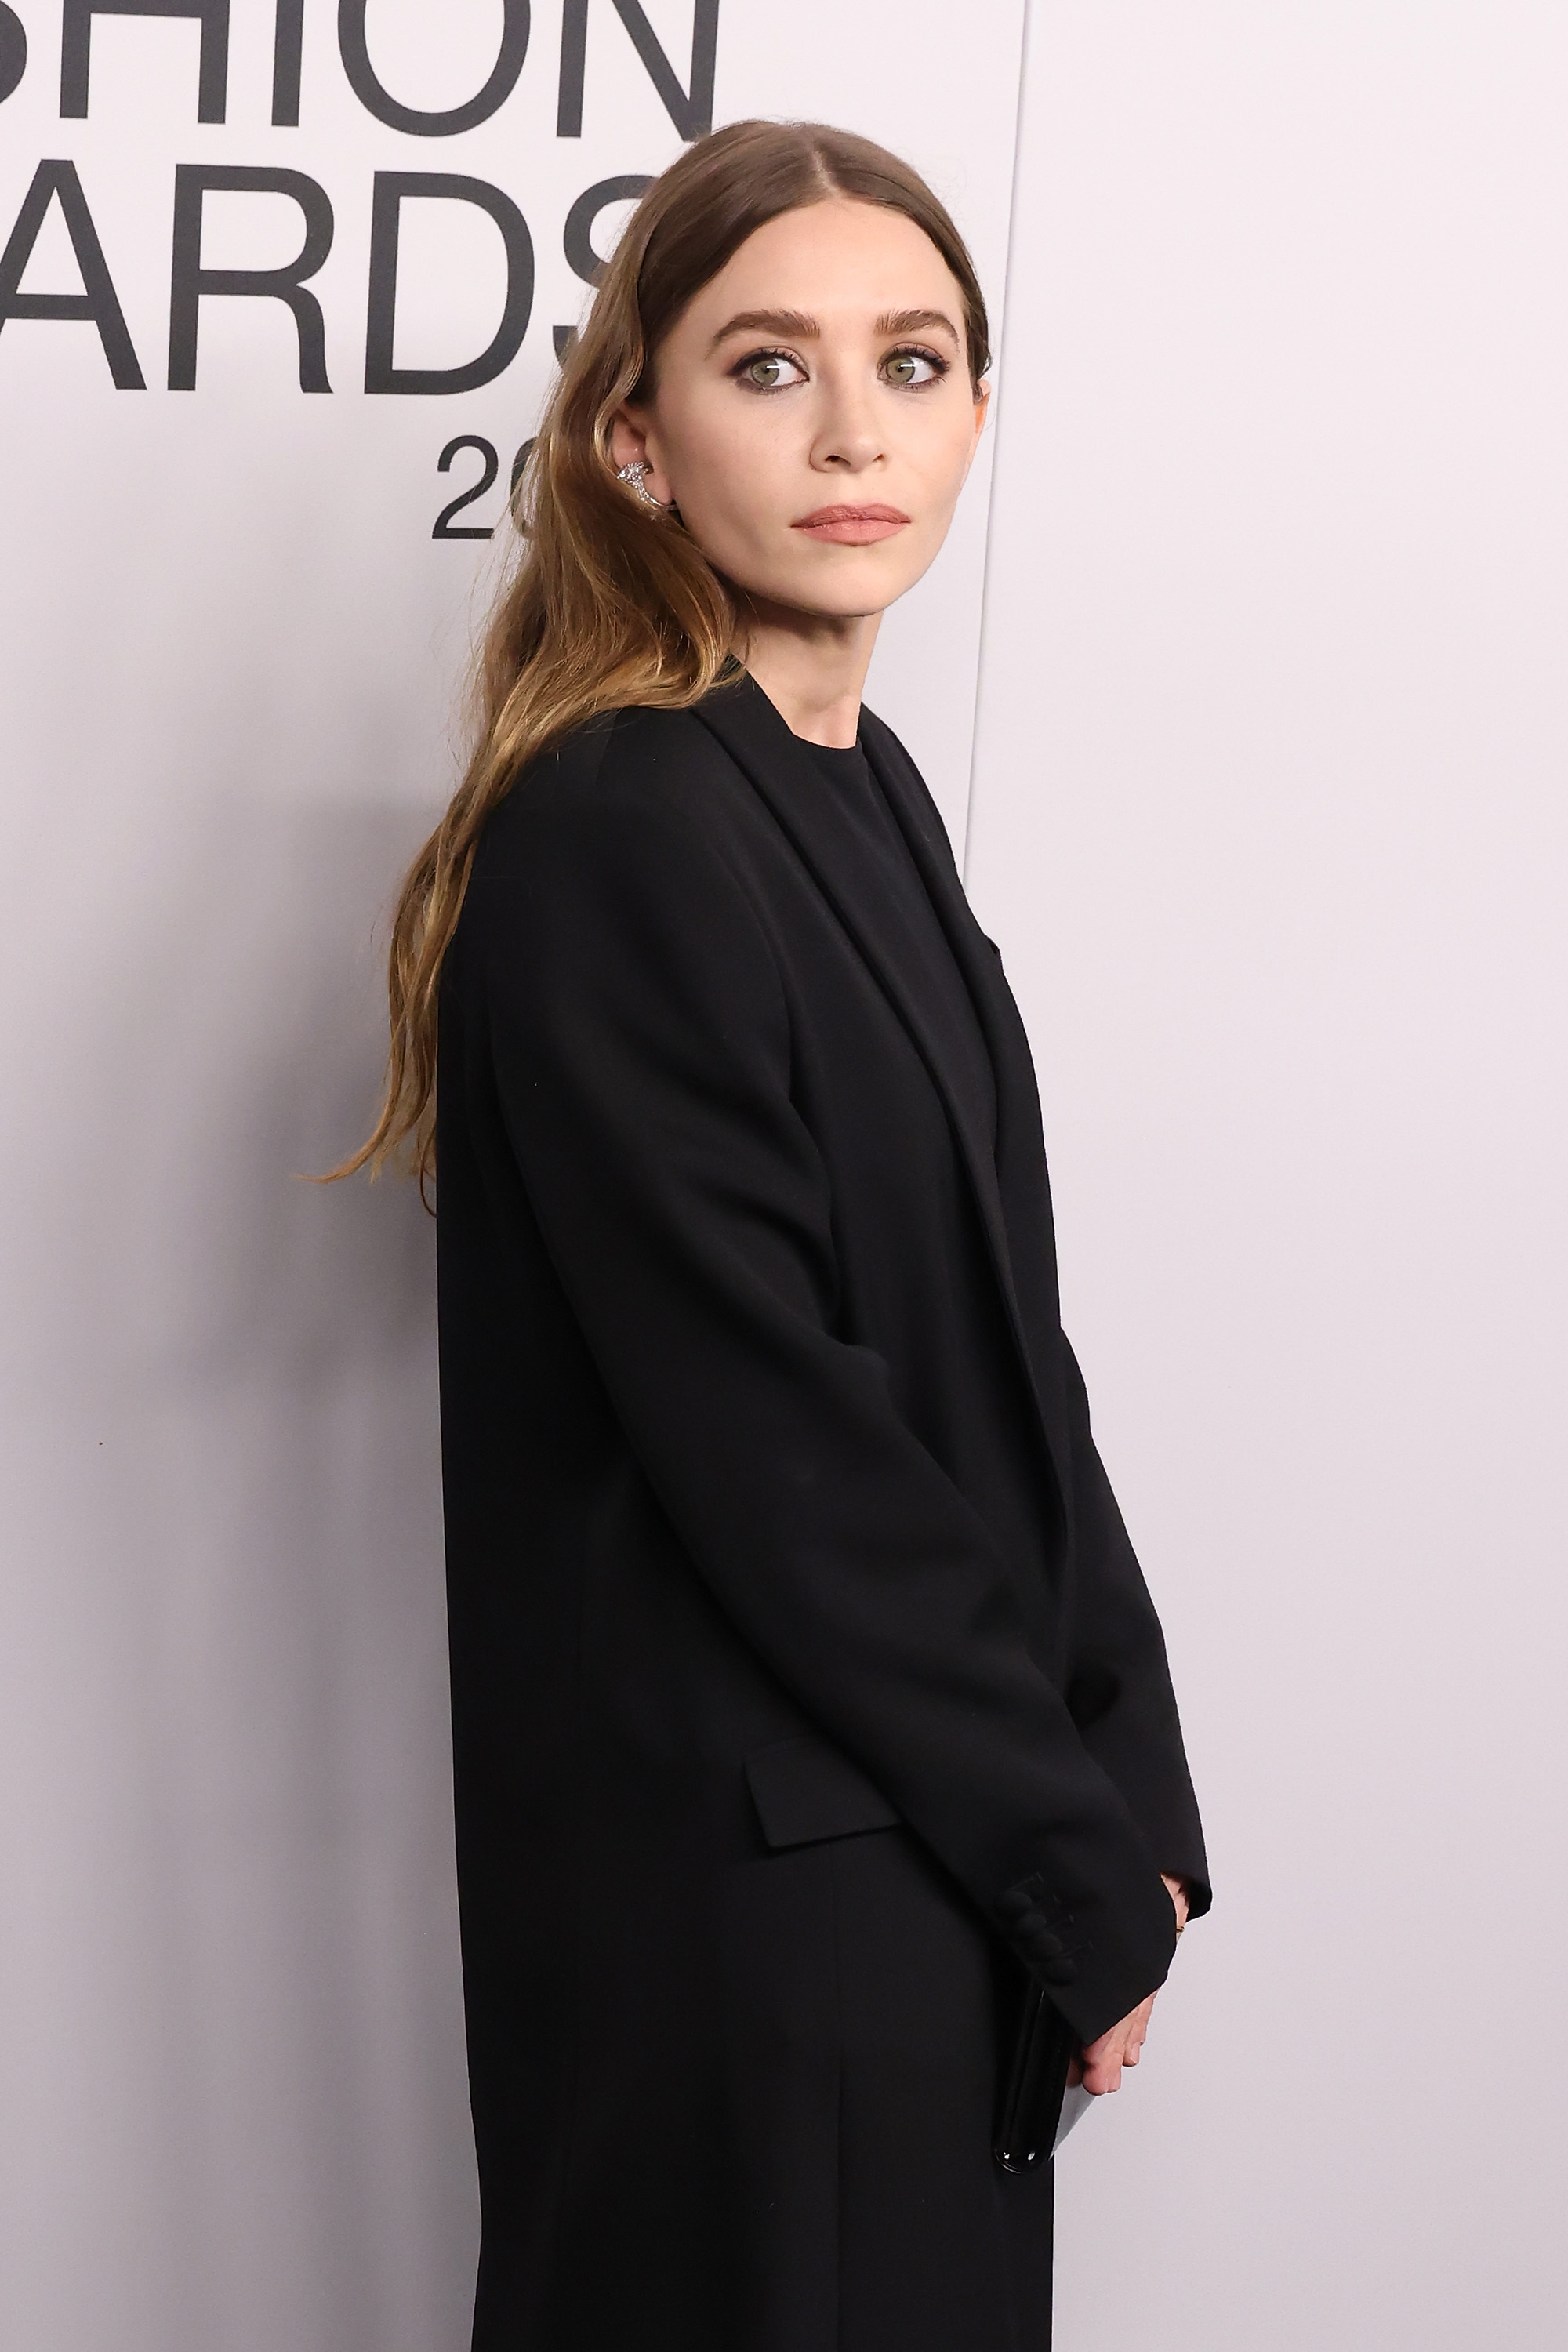 Ashley Olsen attends the 2021 CFDA Awards at The Seagram Building on November 10 in New York City